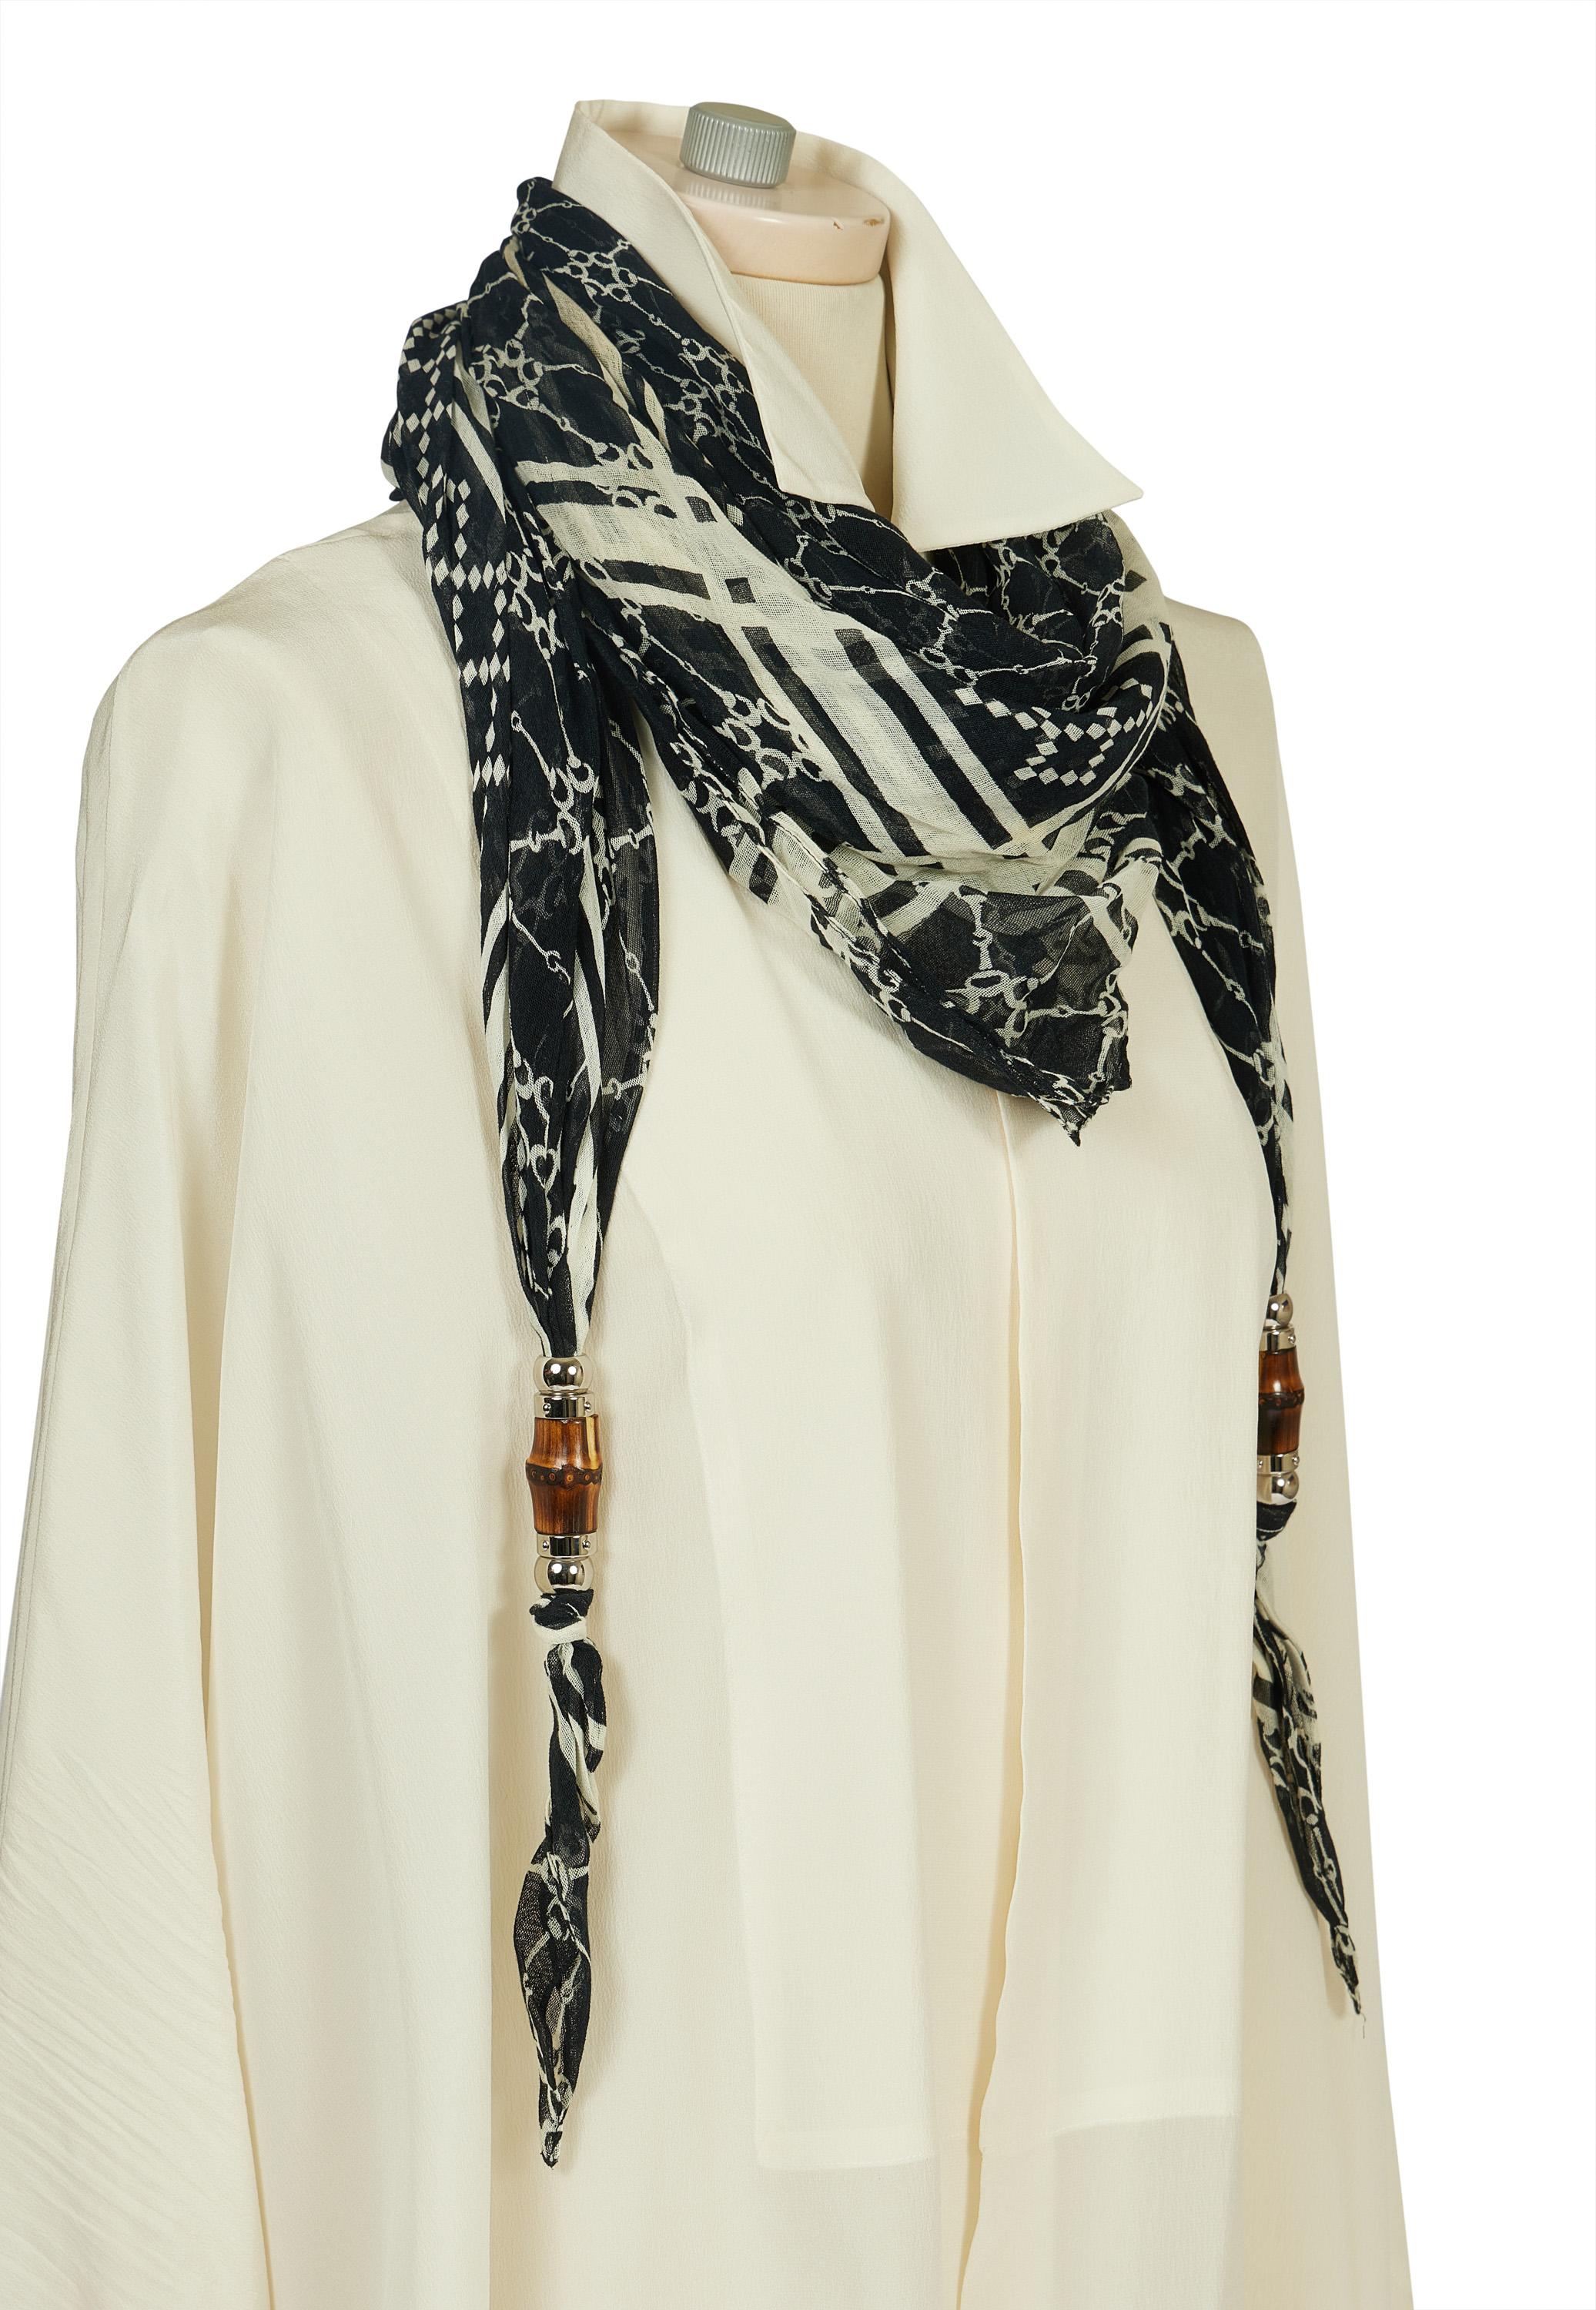 Gucci blue and white large cotton scarf/shawl with bamboo detail dangles.